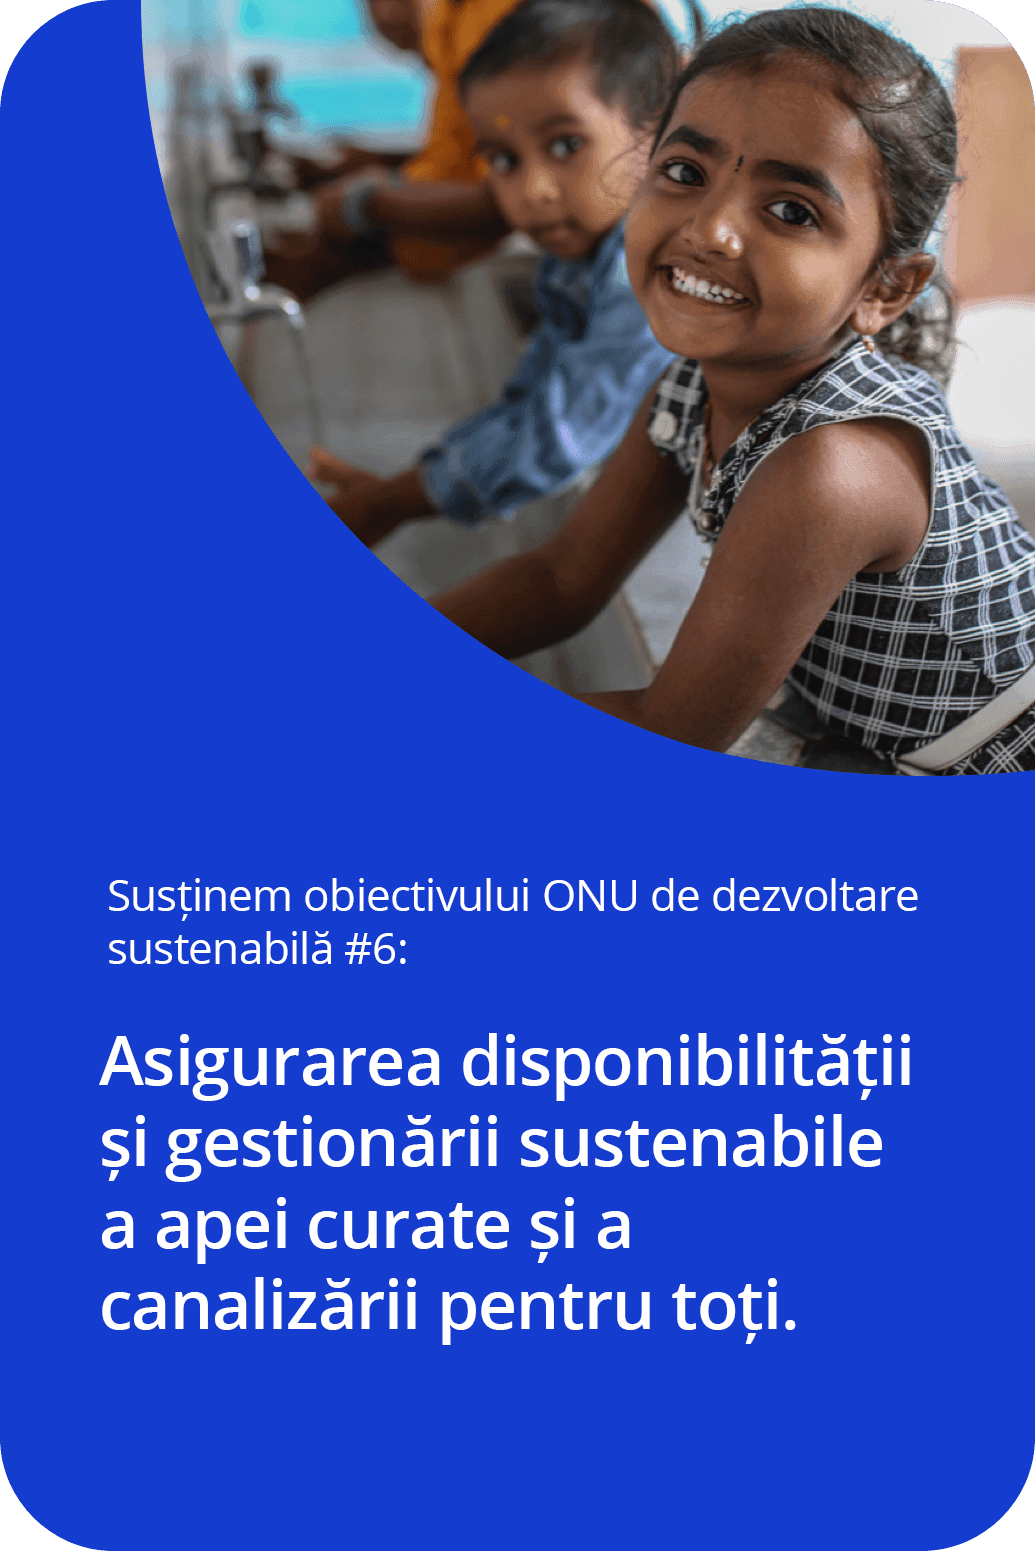 We support UN Sustainable Development Goal #6: Ensure the availability and sustainable management of clean water and sanitation for all.